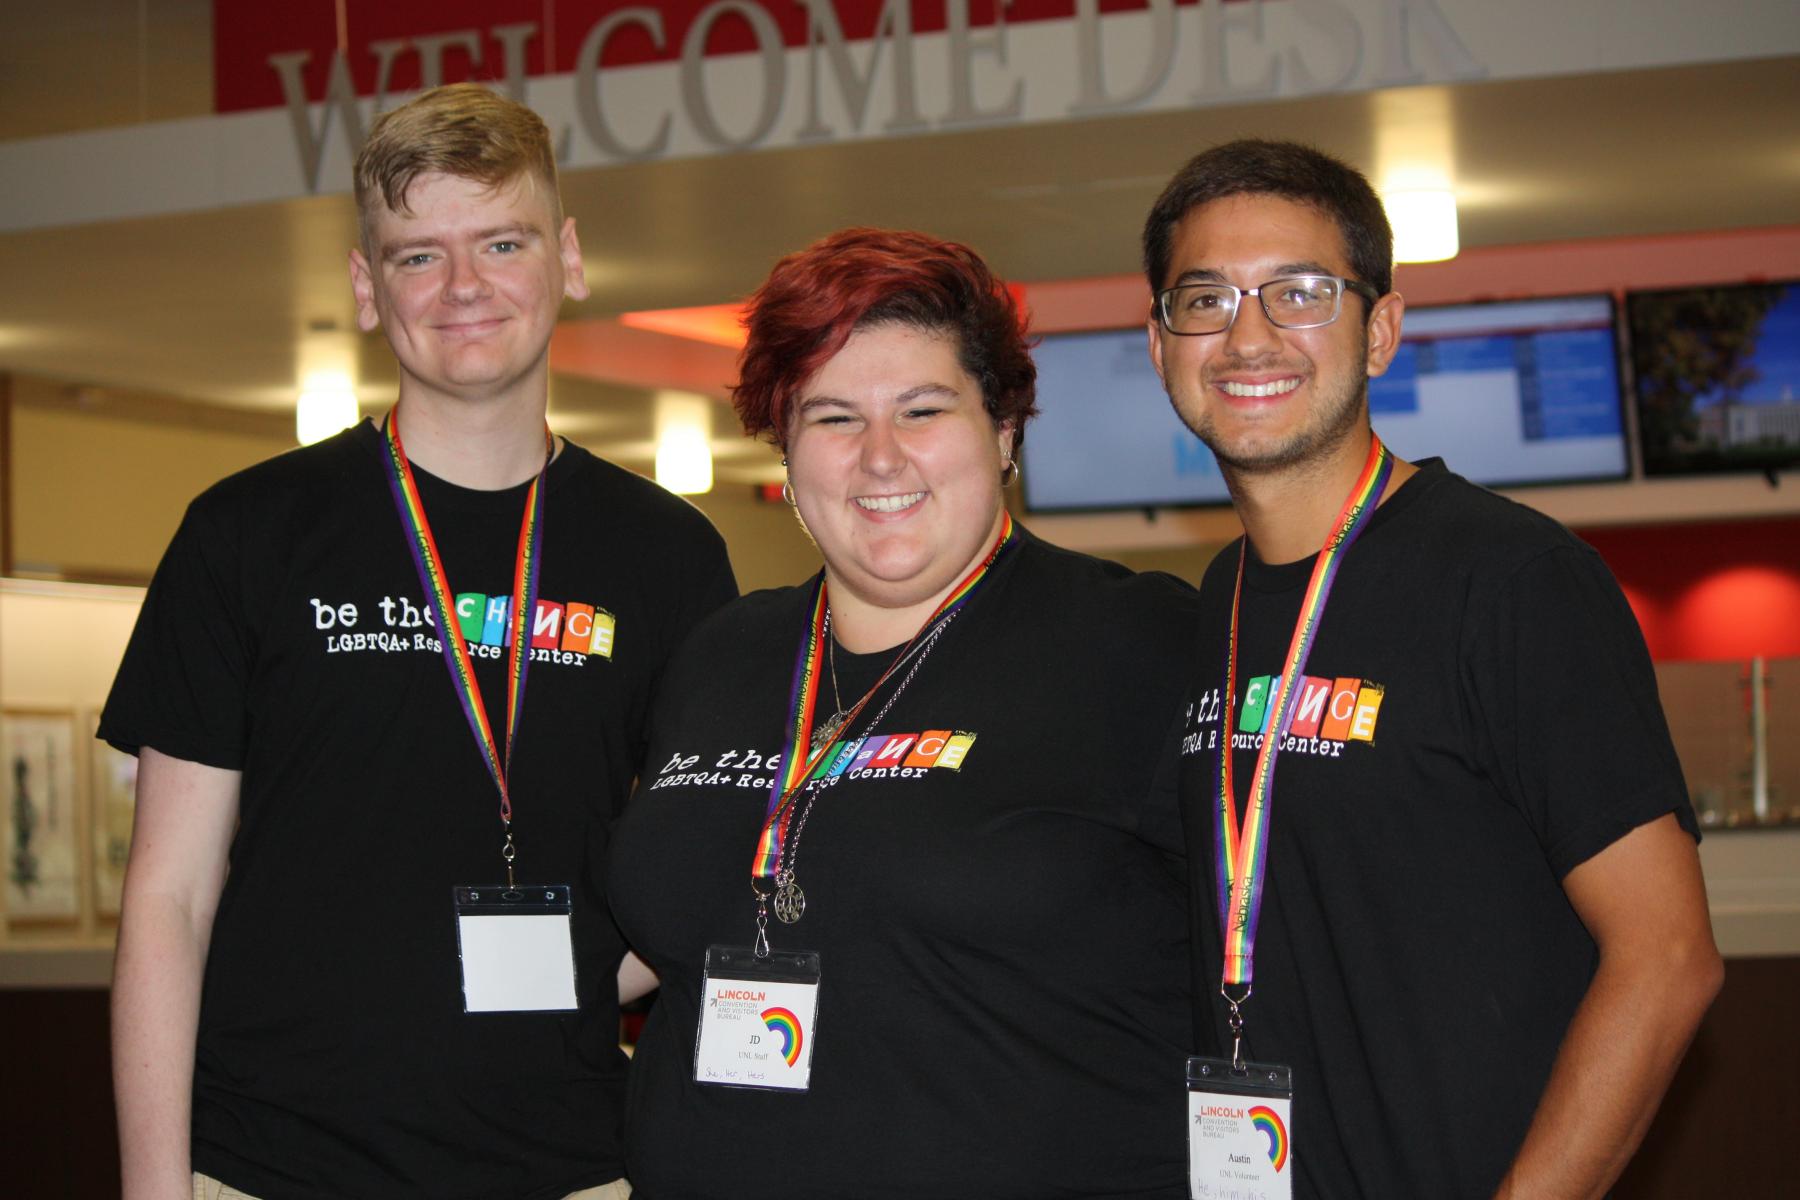 UNL LGBTQA+ Resource Center volunteers helped guide attendees around the Nebraska Union during the day-long institute